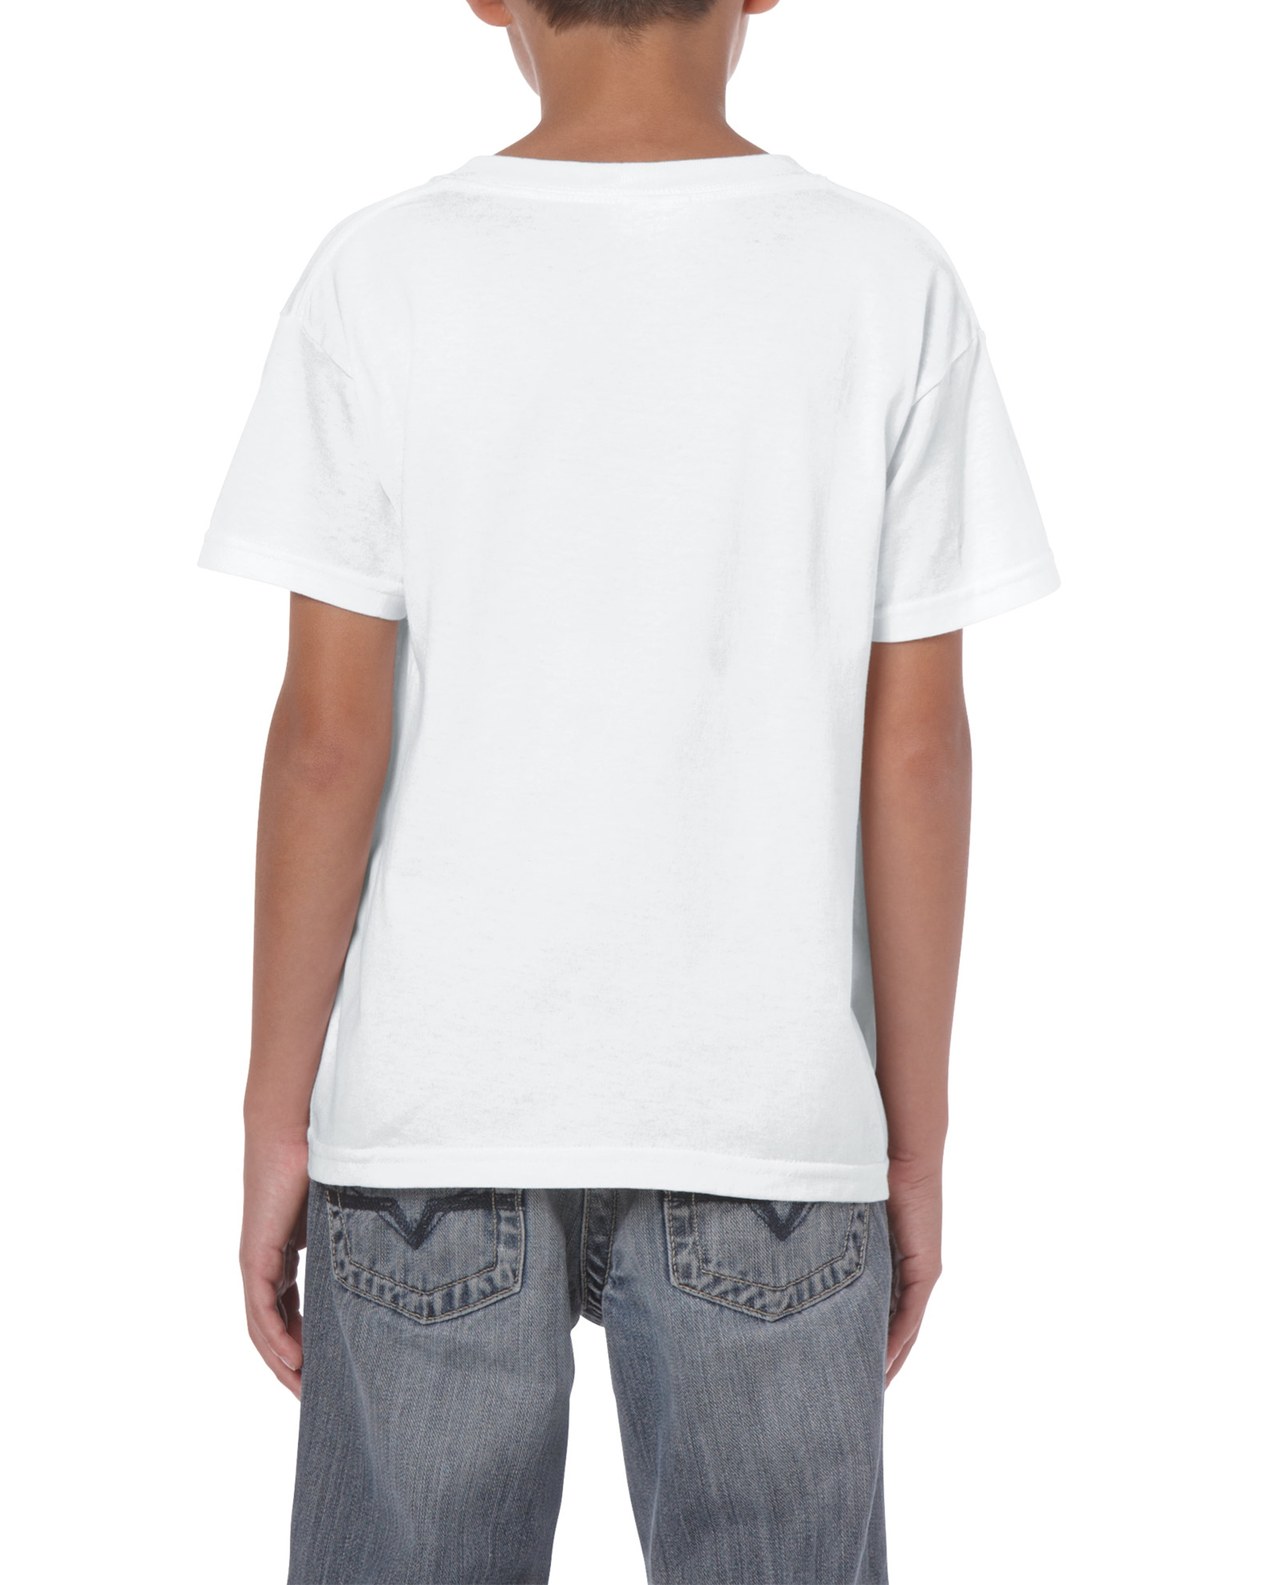 Unisex - YOUTH T-SHIRTS - WHITE As Seen In...